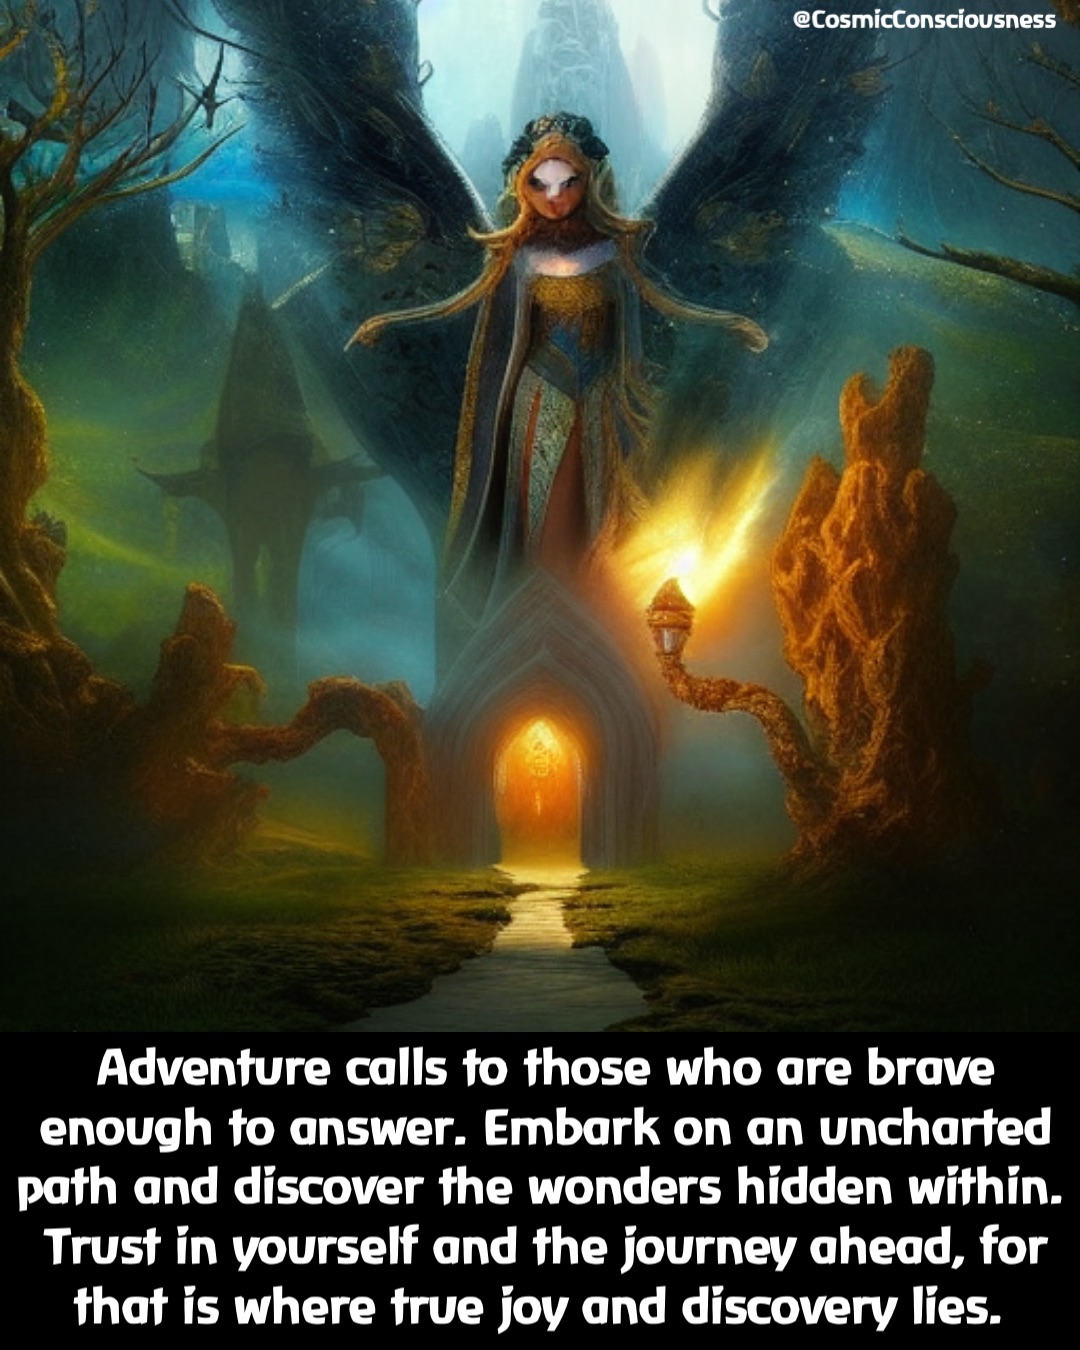 Adventure calls to those who are brave enough to answer. Embark on an uncharted path and discover the wonders hidden within. Trust in yourself and the journey ahead, for that is where true joy and discovery lies. @CosmicConsciousness